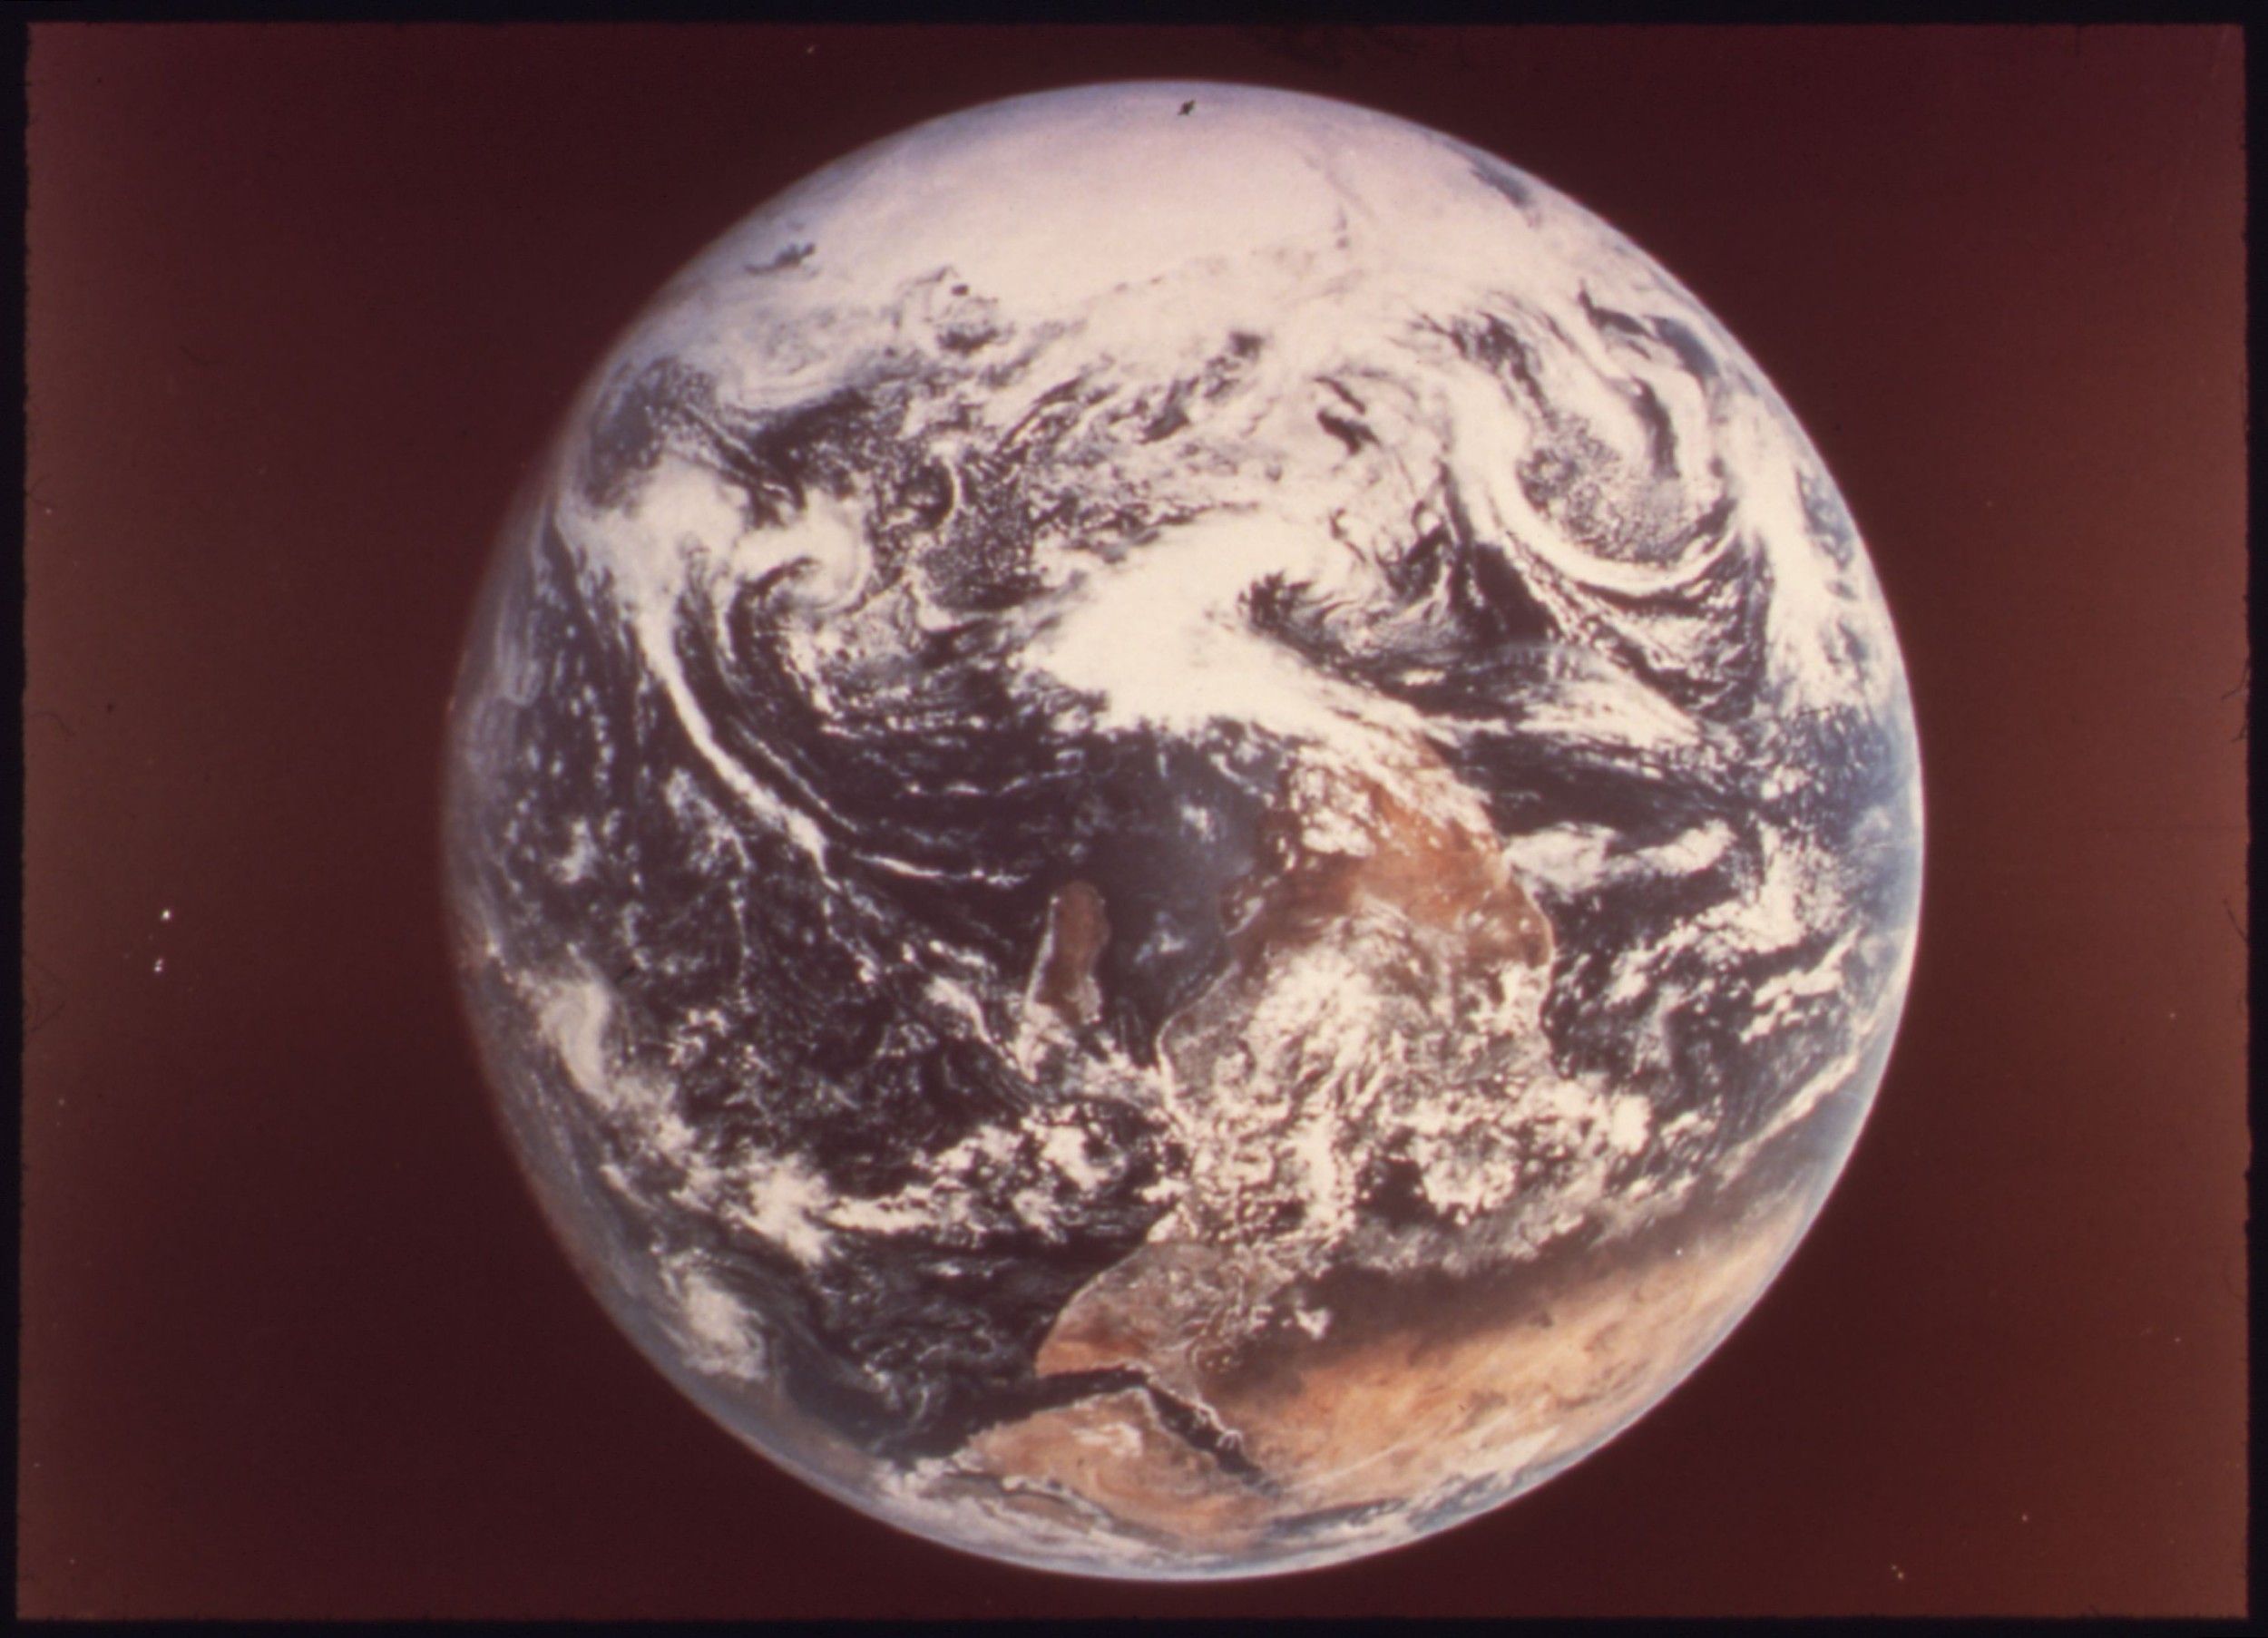 History By Mail - Photograph of Earth taken by Apollo 17 astronauts (December 1972)